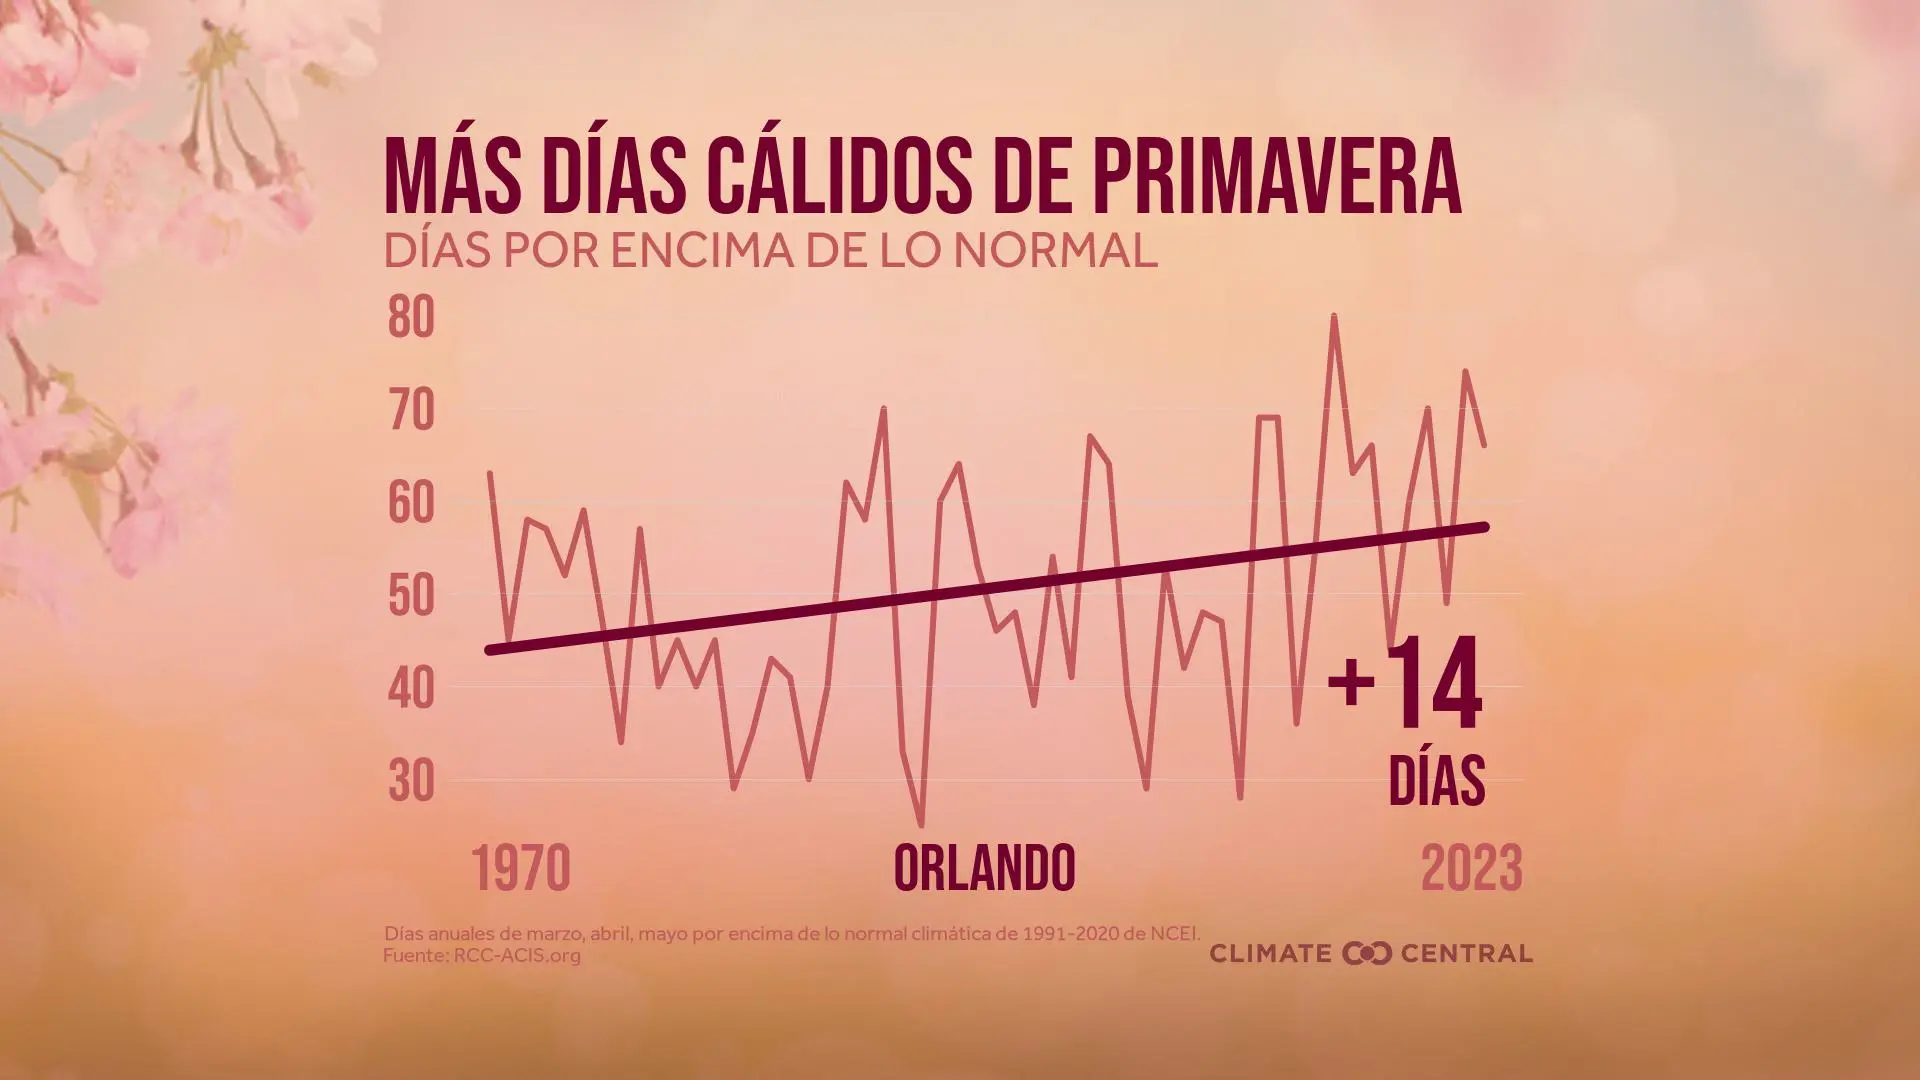 Olrando has about 14 days more with above-average temps since 1970.